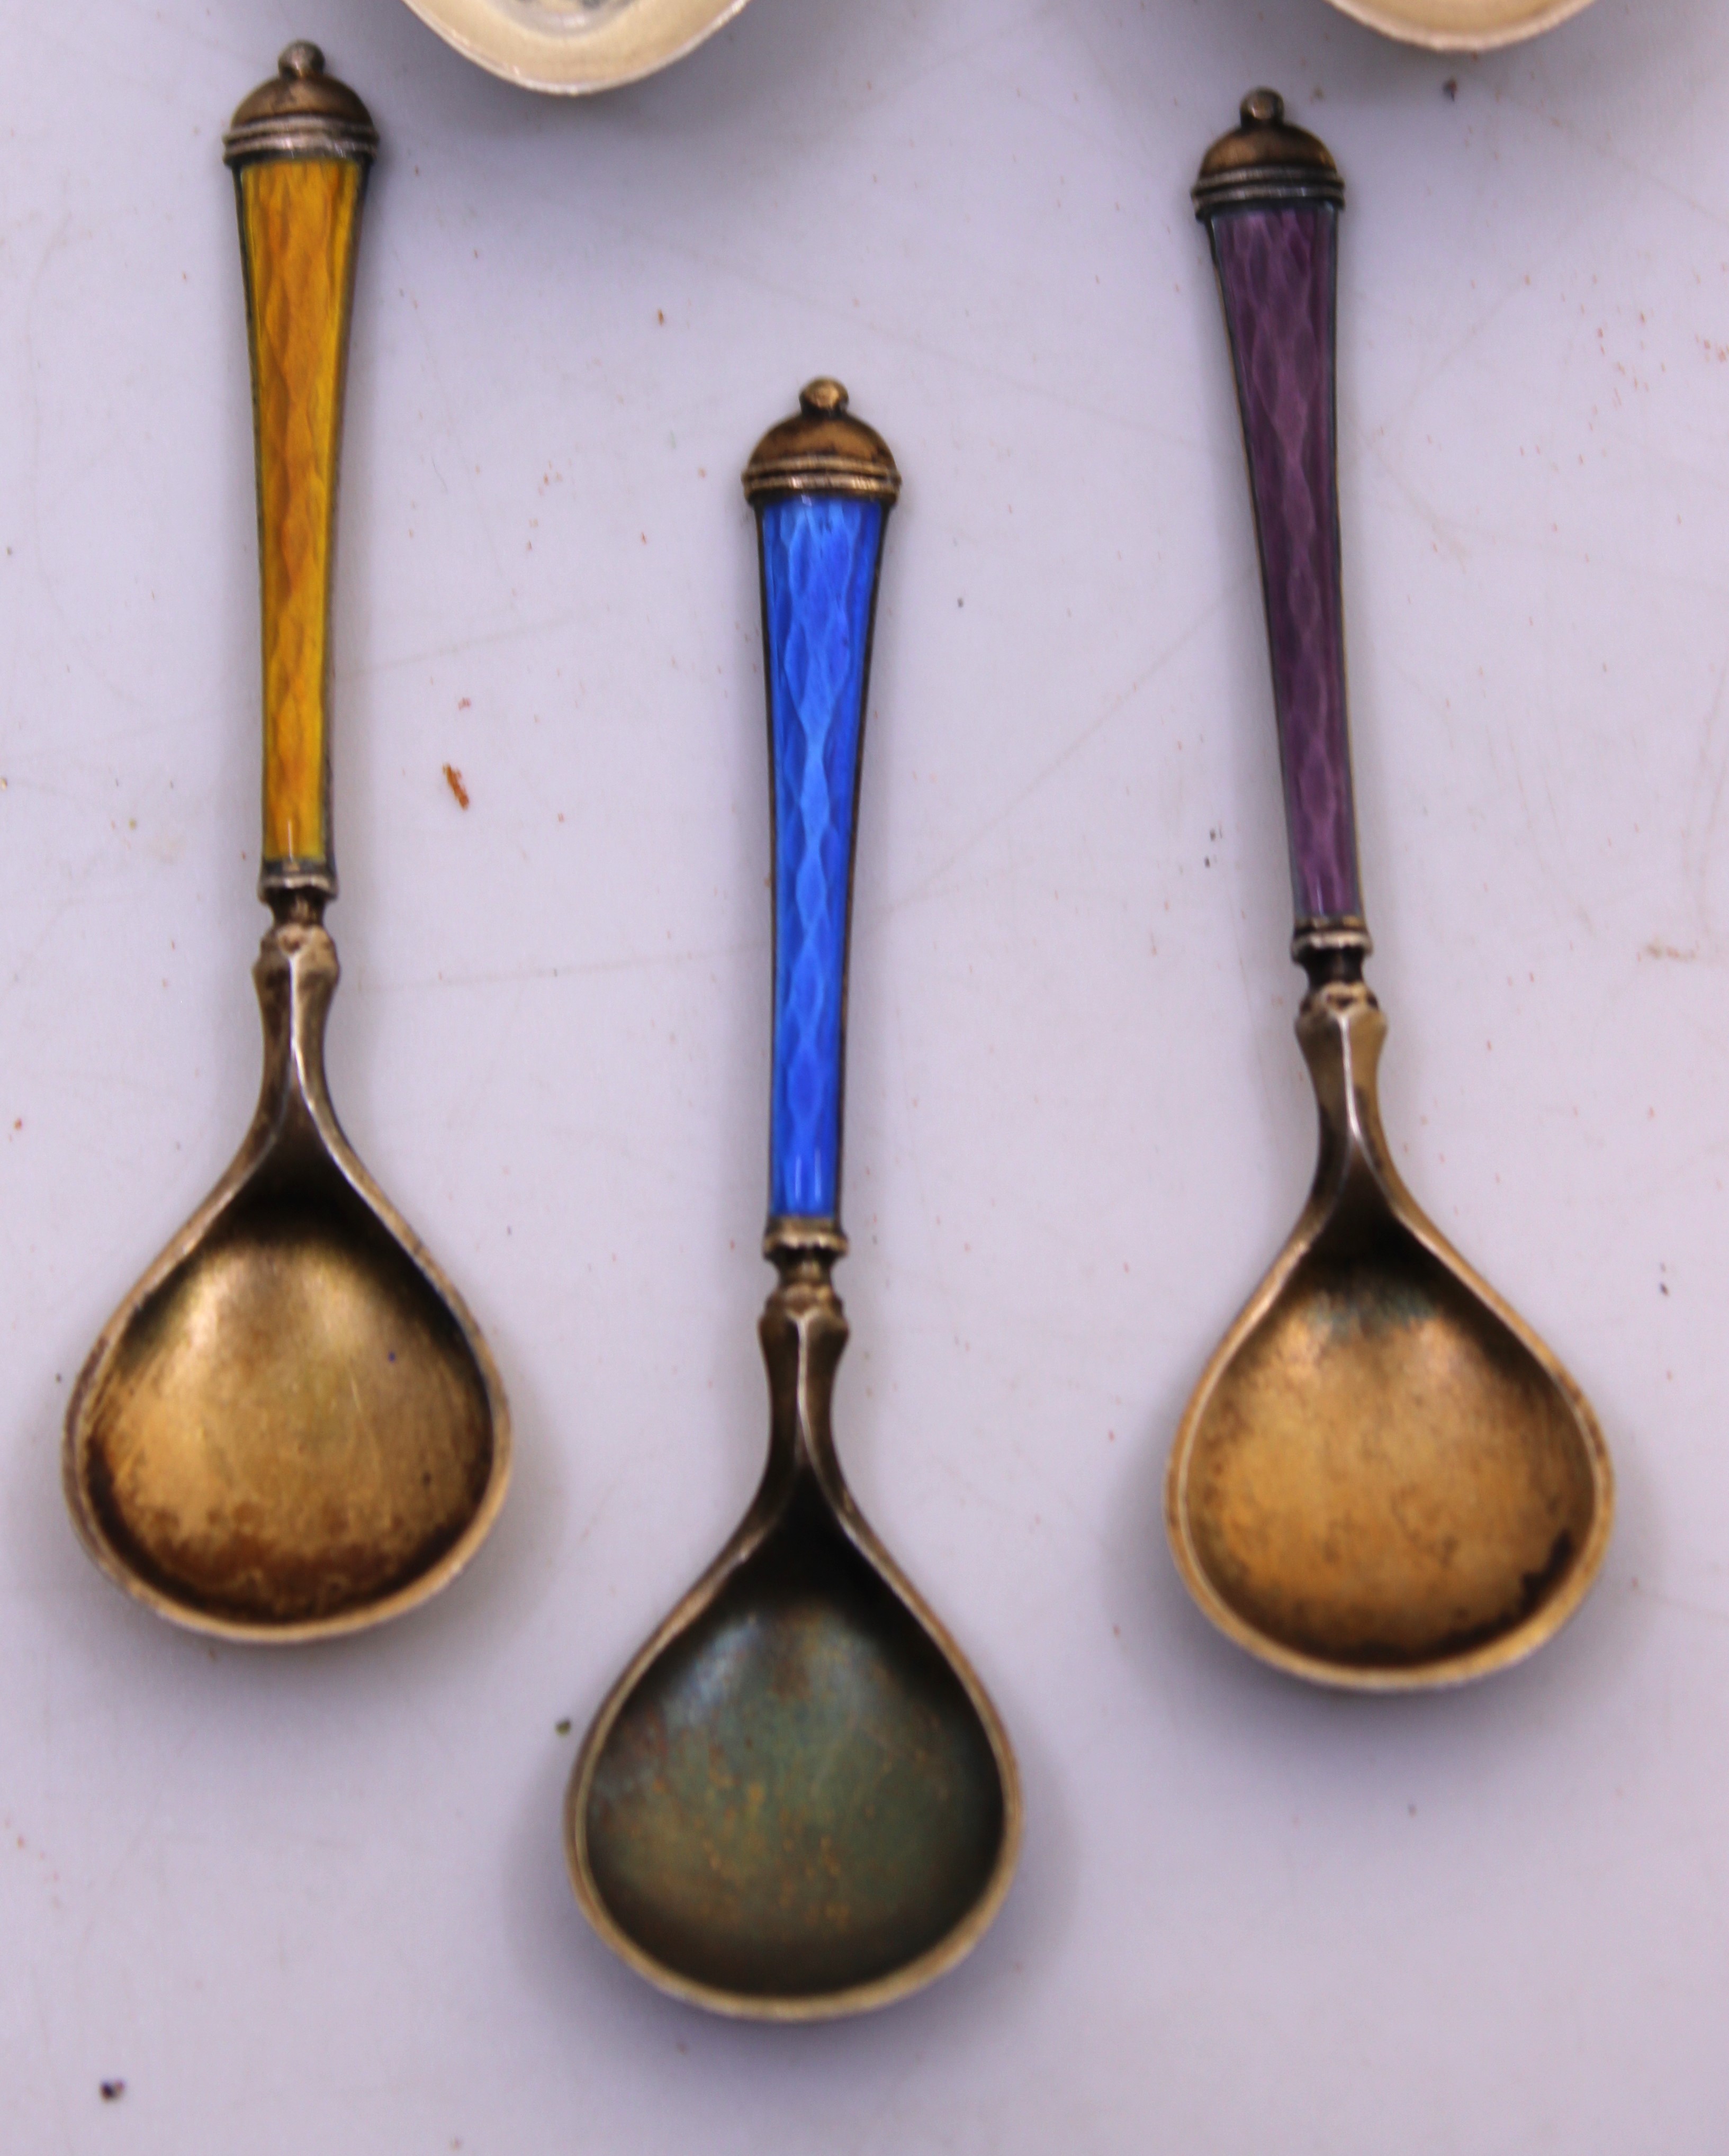 Selection of Sterling Silver Crested Teaspoons, EPNS Teaspoons, Commemorative Coins and a - Image 7 of 7